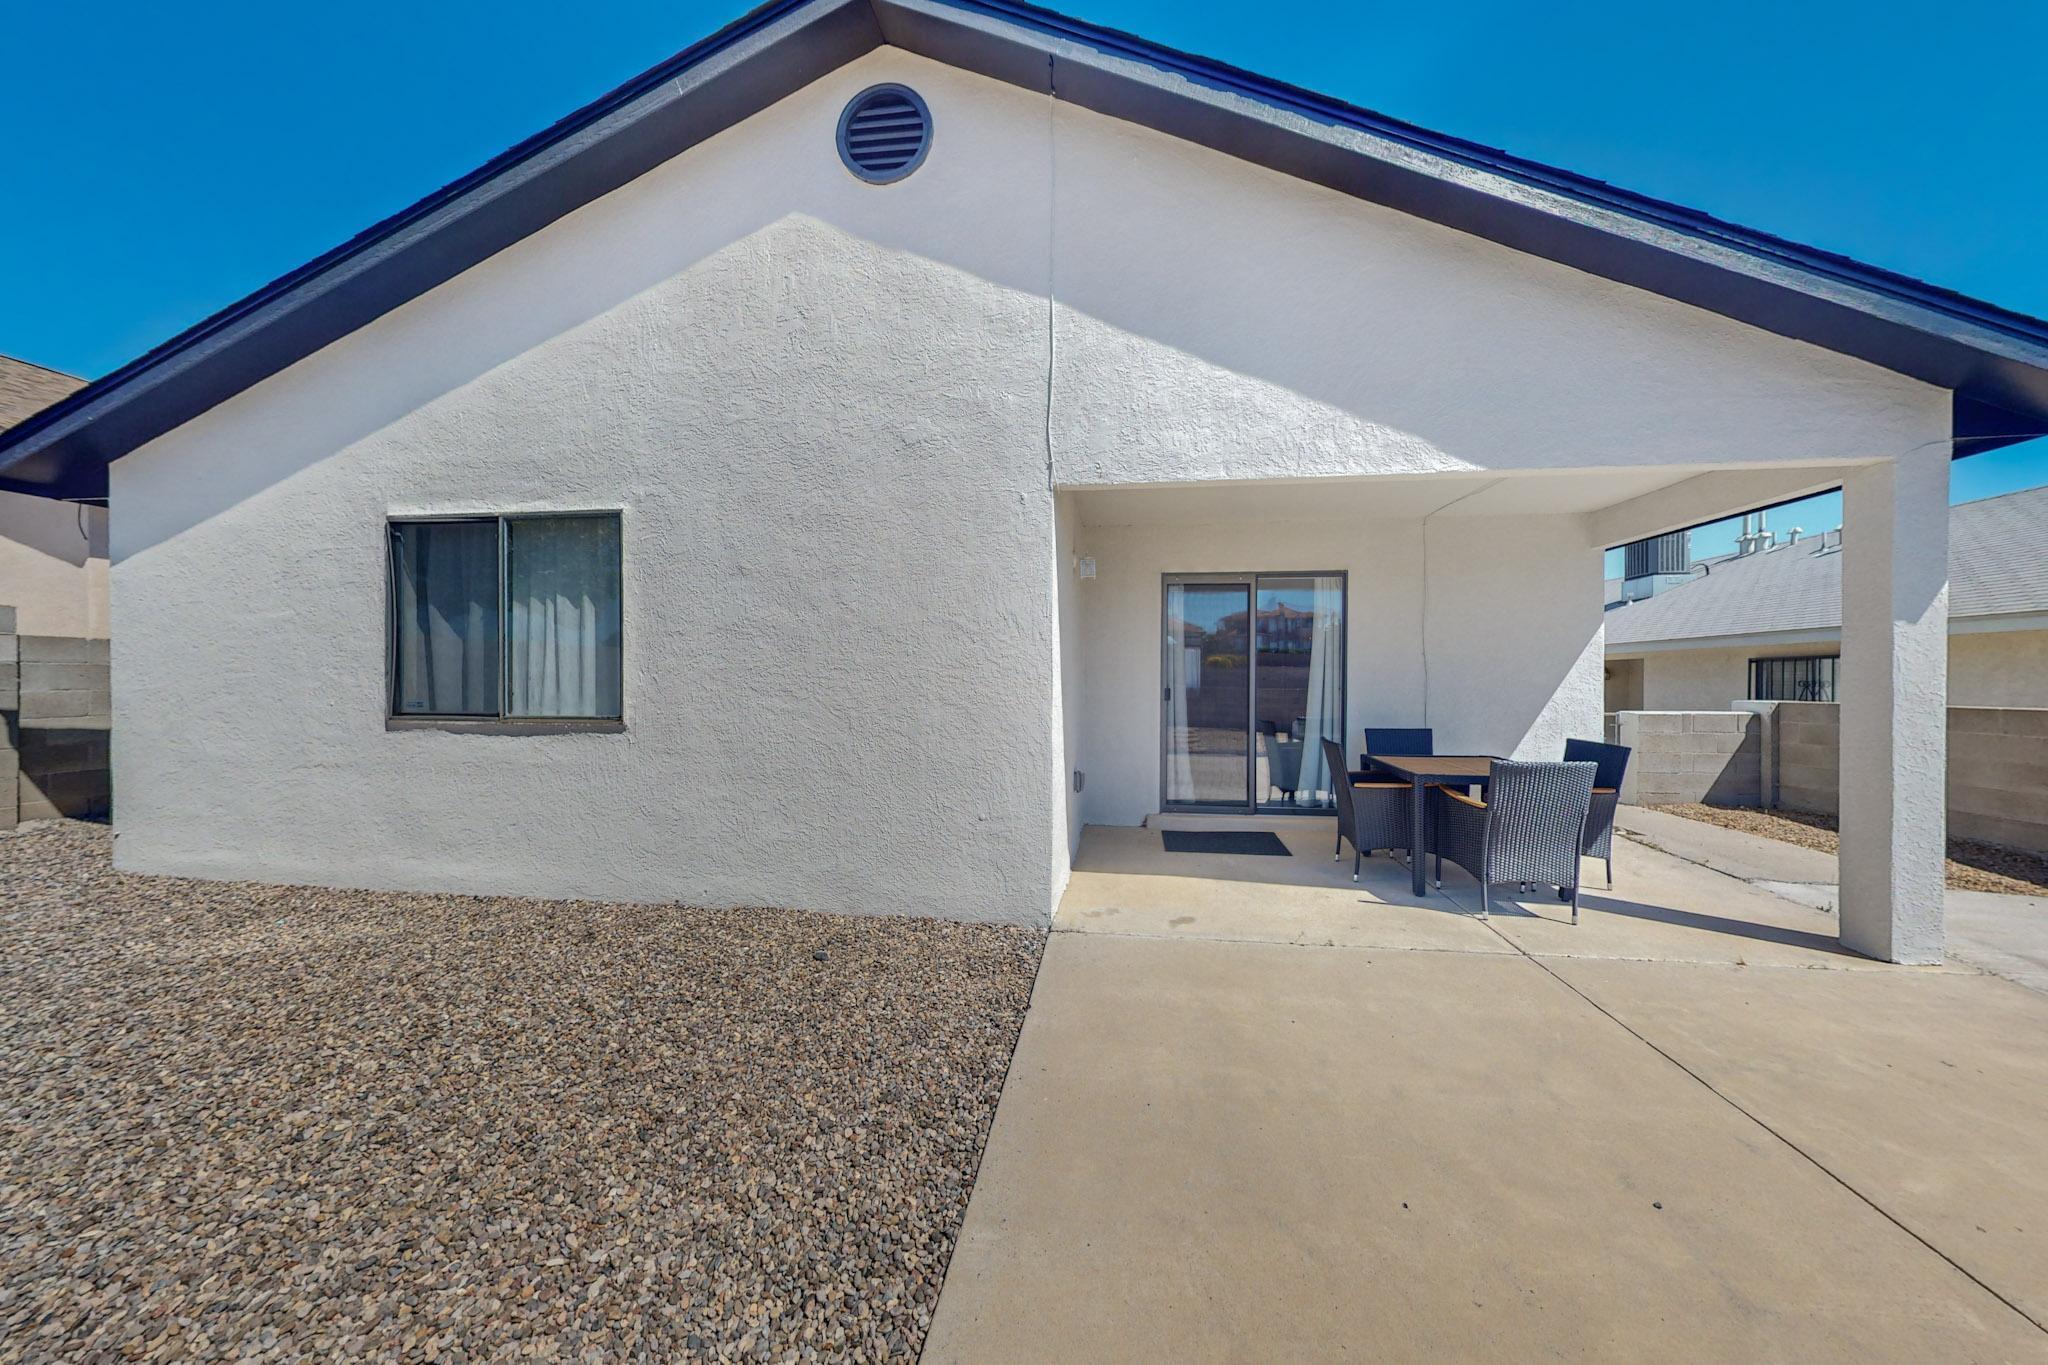 10439 Trail Boss Drive NW, Albuquerque, New Mexico 87114, 3 Bedrooms Bedrooms, ,2 BathroomsBathrooms,Residential,For Sale,10439 Trail Boss Drive NW,1061814